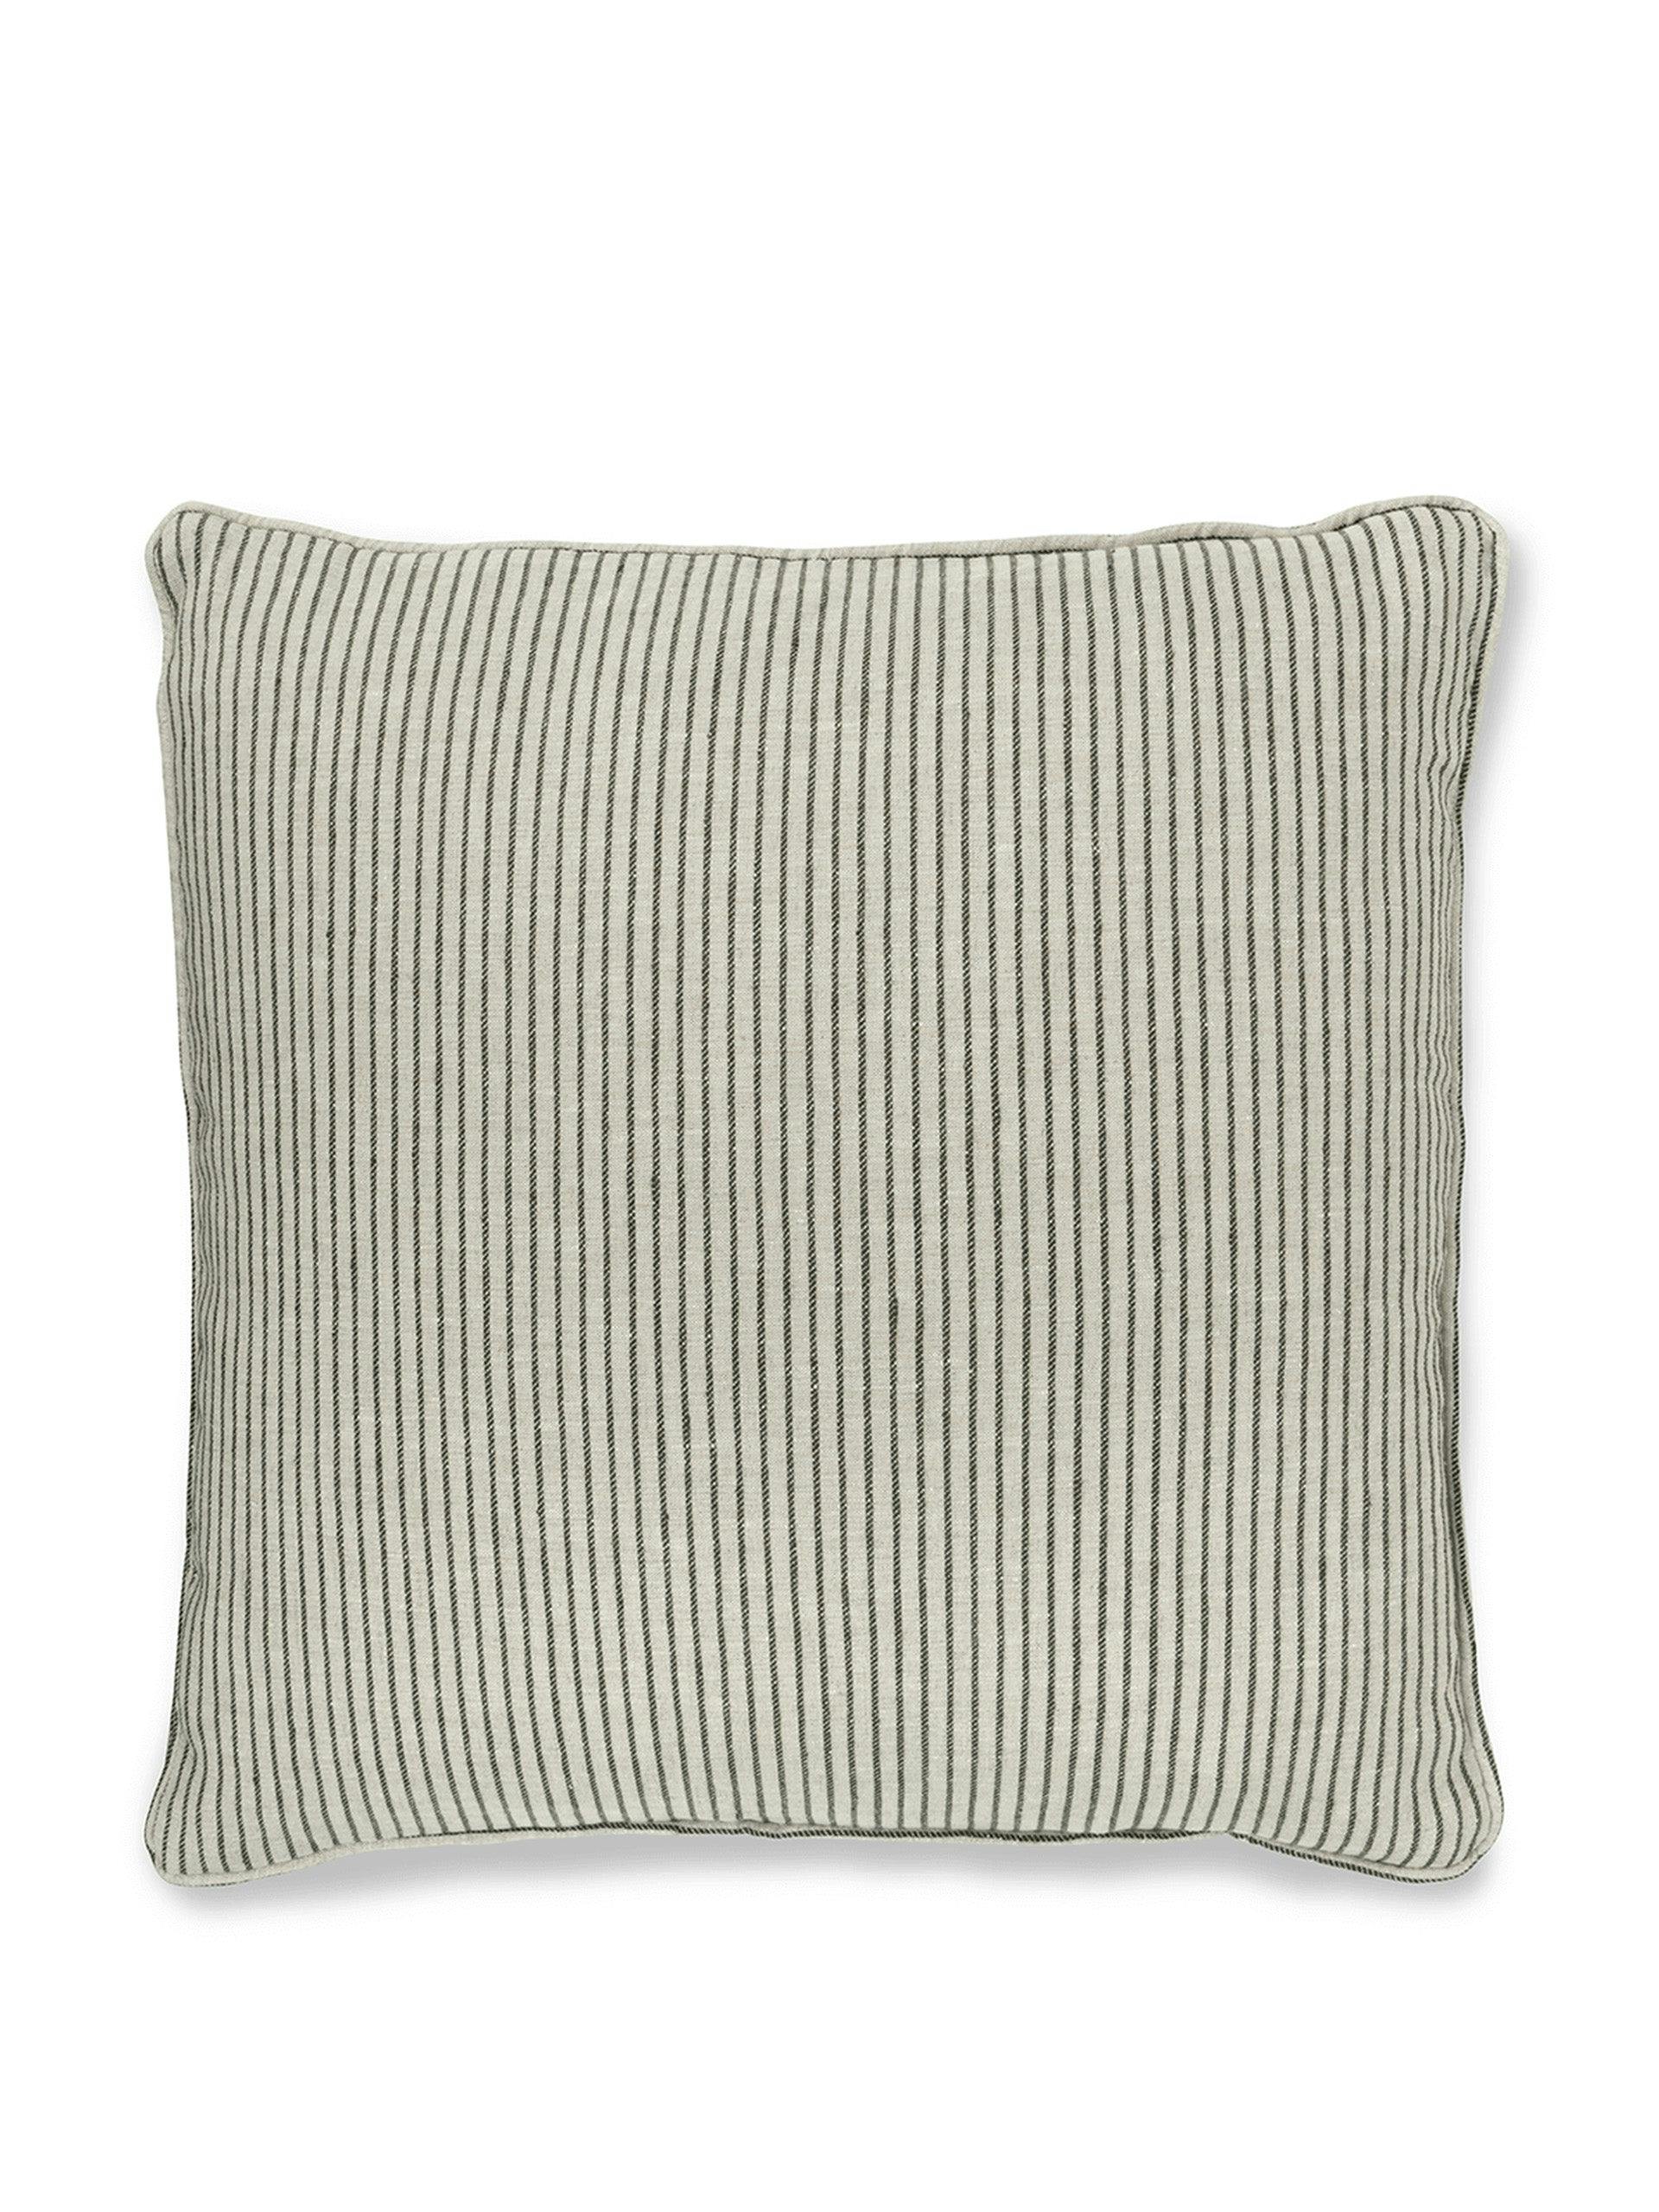 Textured stripe cushion in charcoal and natural with self trim